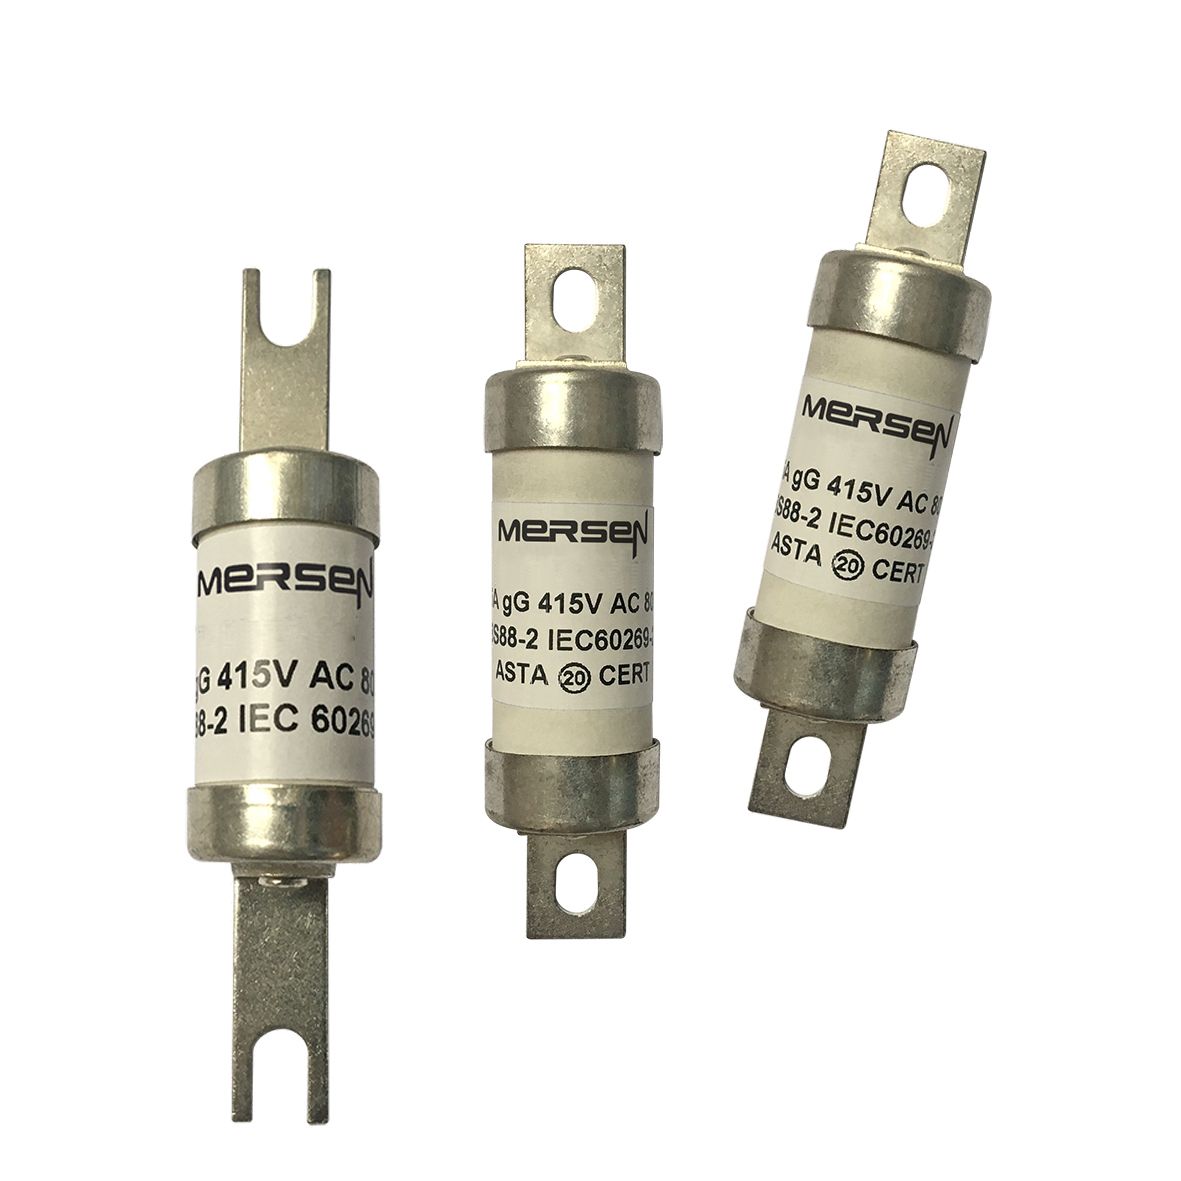 A1019176 - Offset Tag fuse-links gG BEIT 415VAC/250VDC 36A